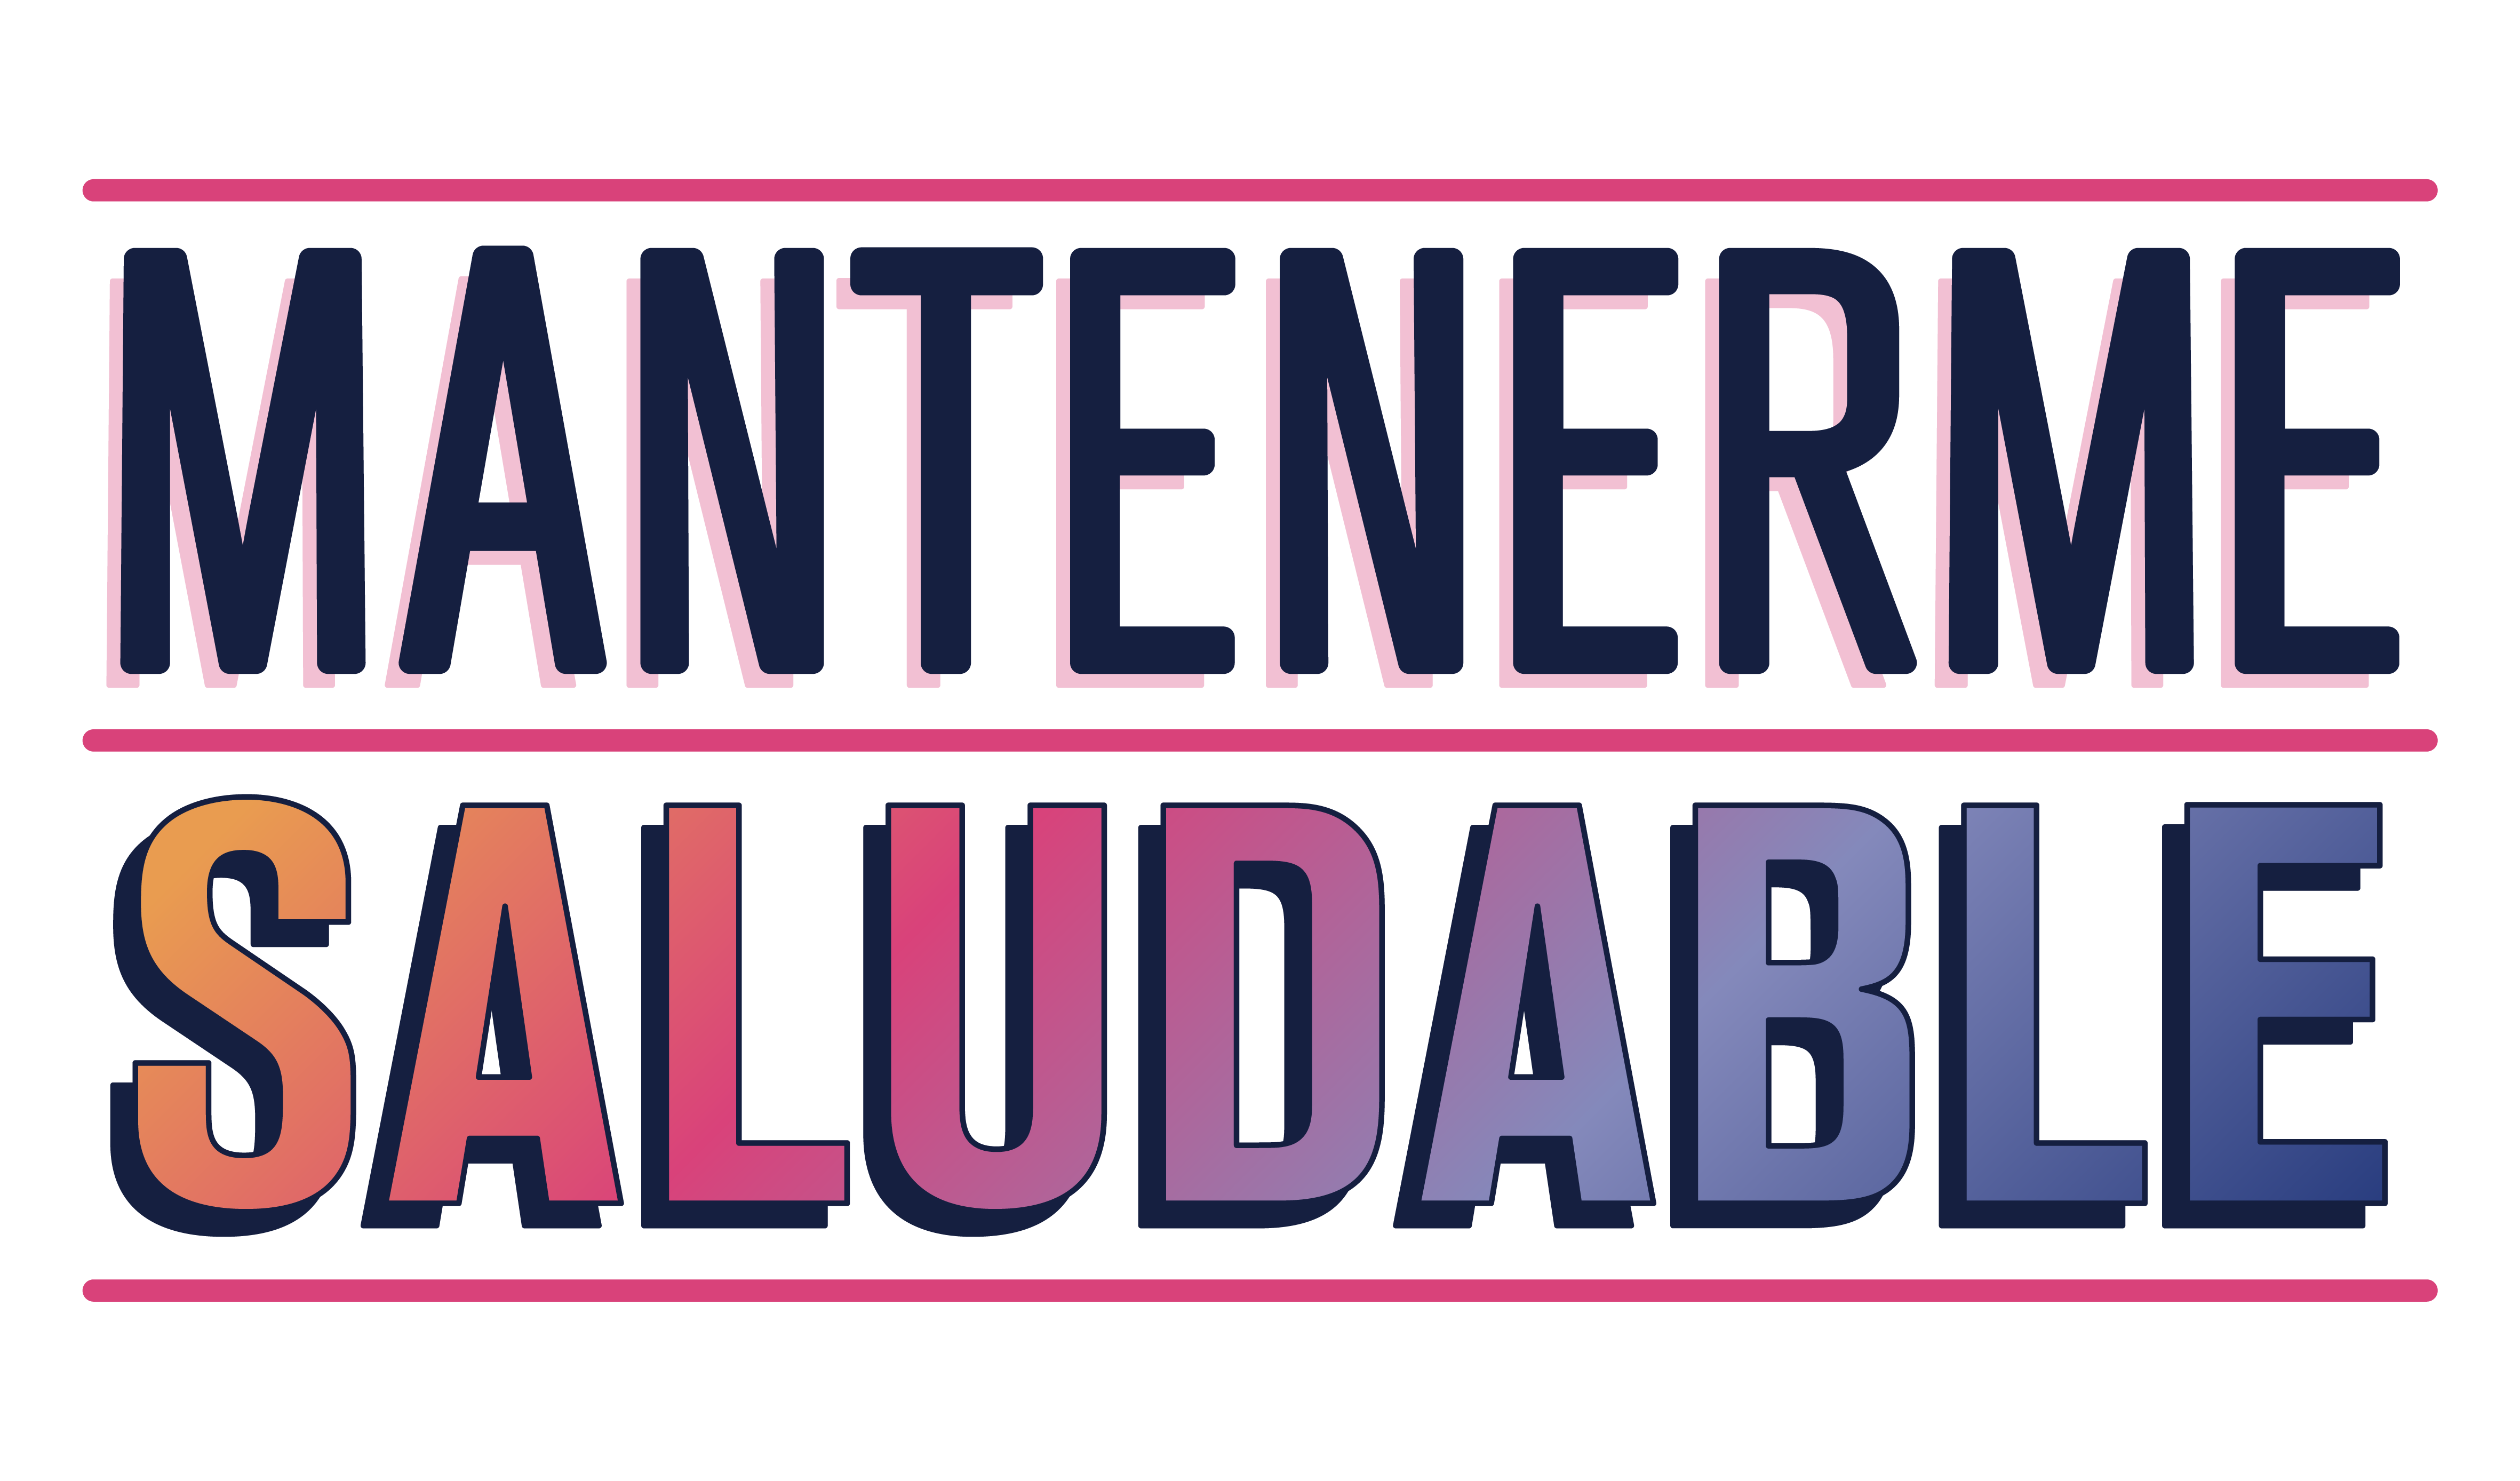 Illustrated lettering that reads "Mantenerme saludable"